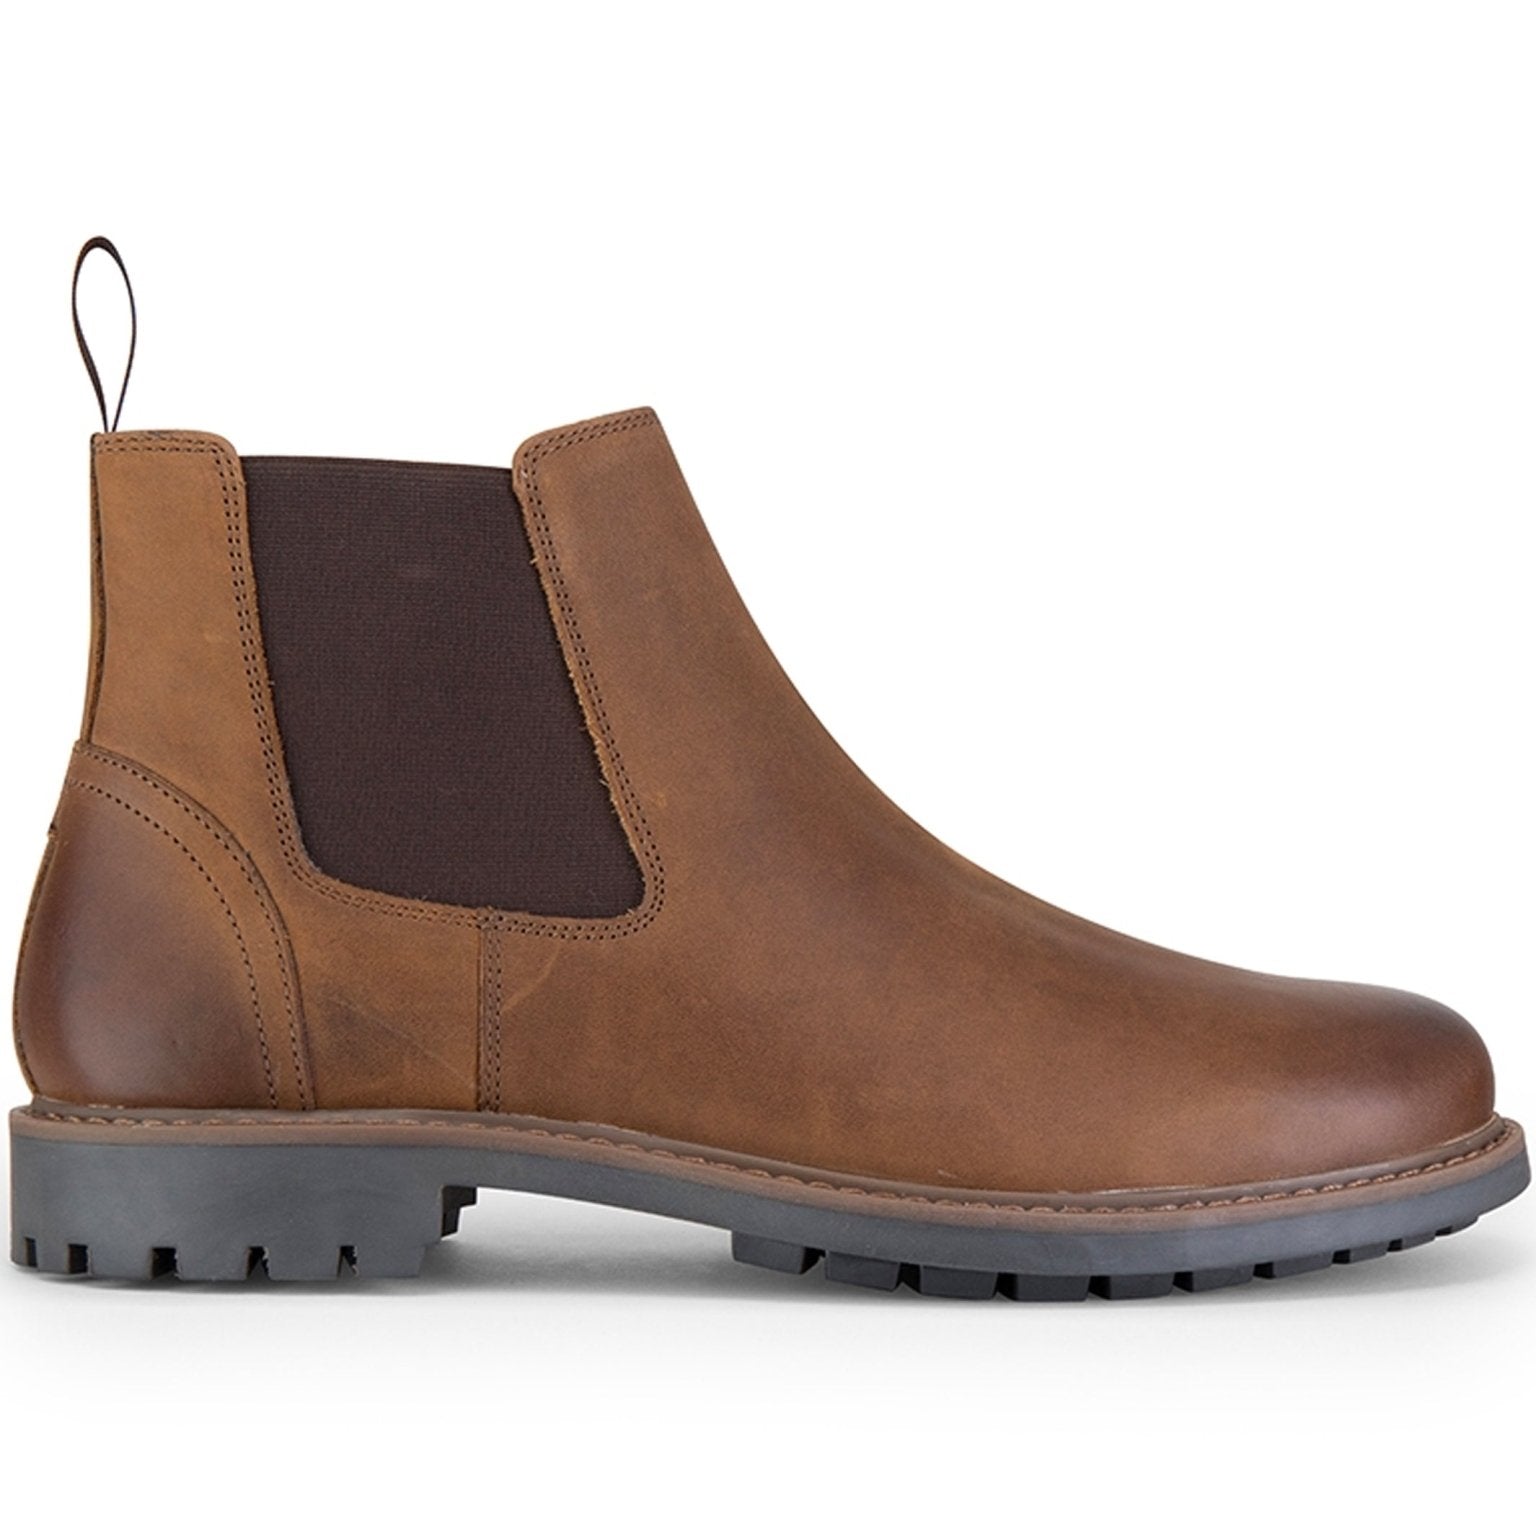 4elementsclothingHoggs of FifeHoggs of Fife - Mens Chelsea Boot / Dealer Boot - Banff Country ClassicBoots4232/WA/40